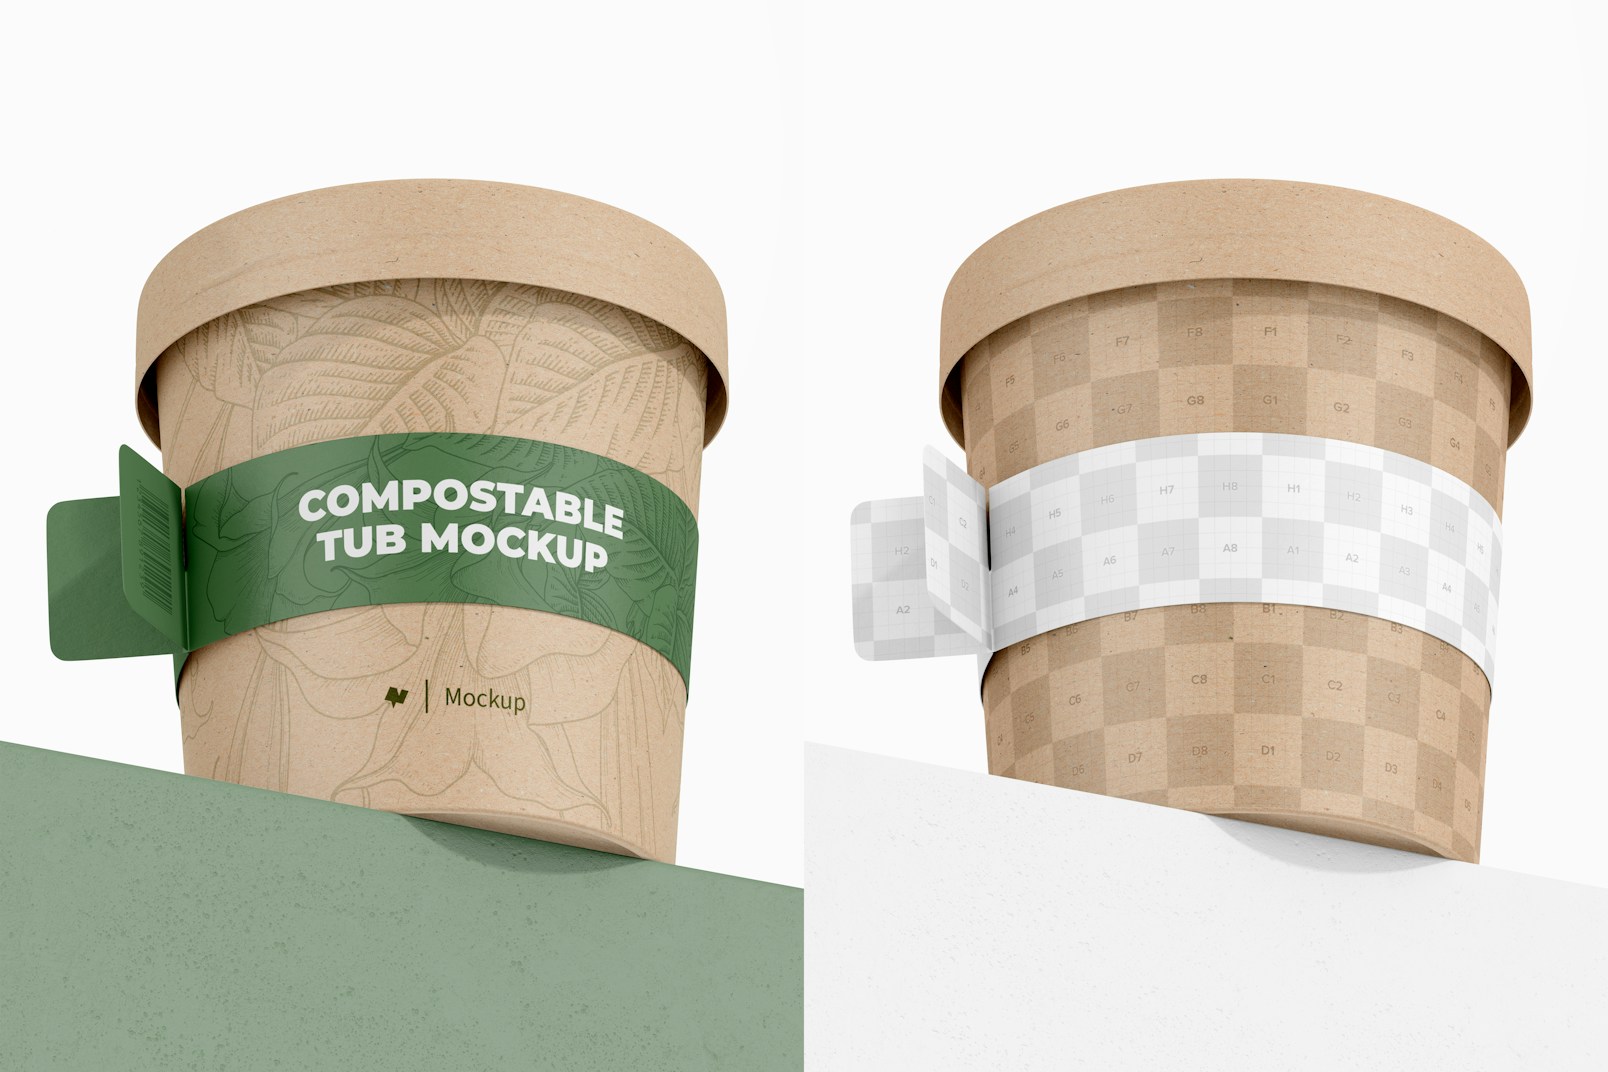 Compostable Tub with Label Mockup, Low Angle View